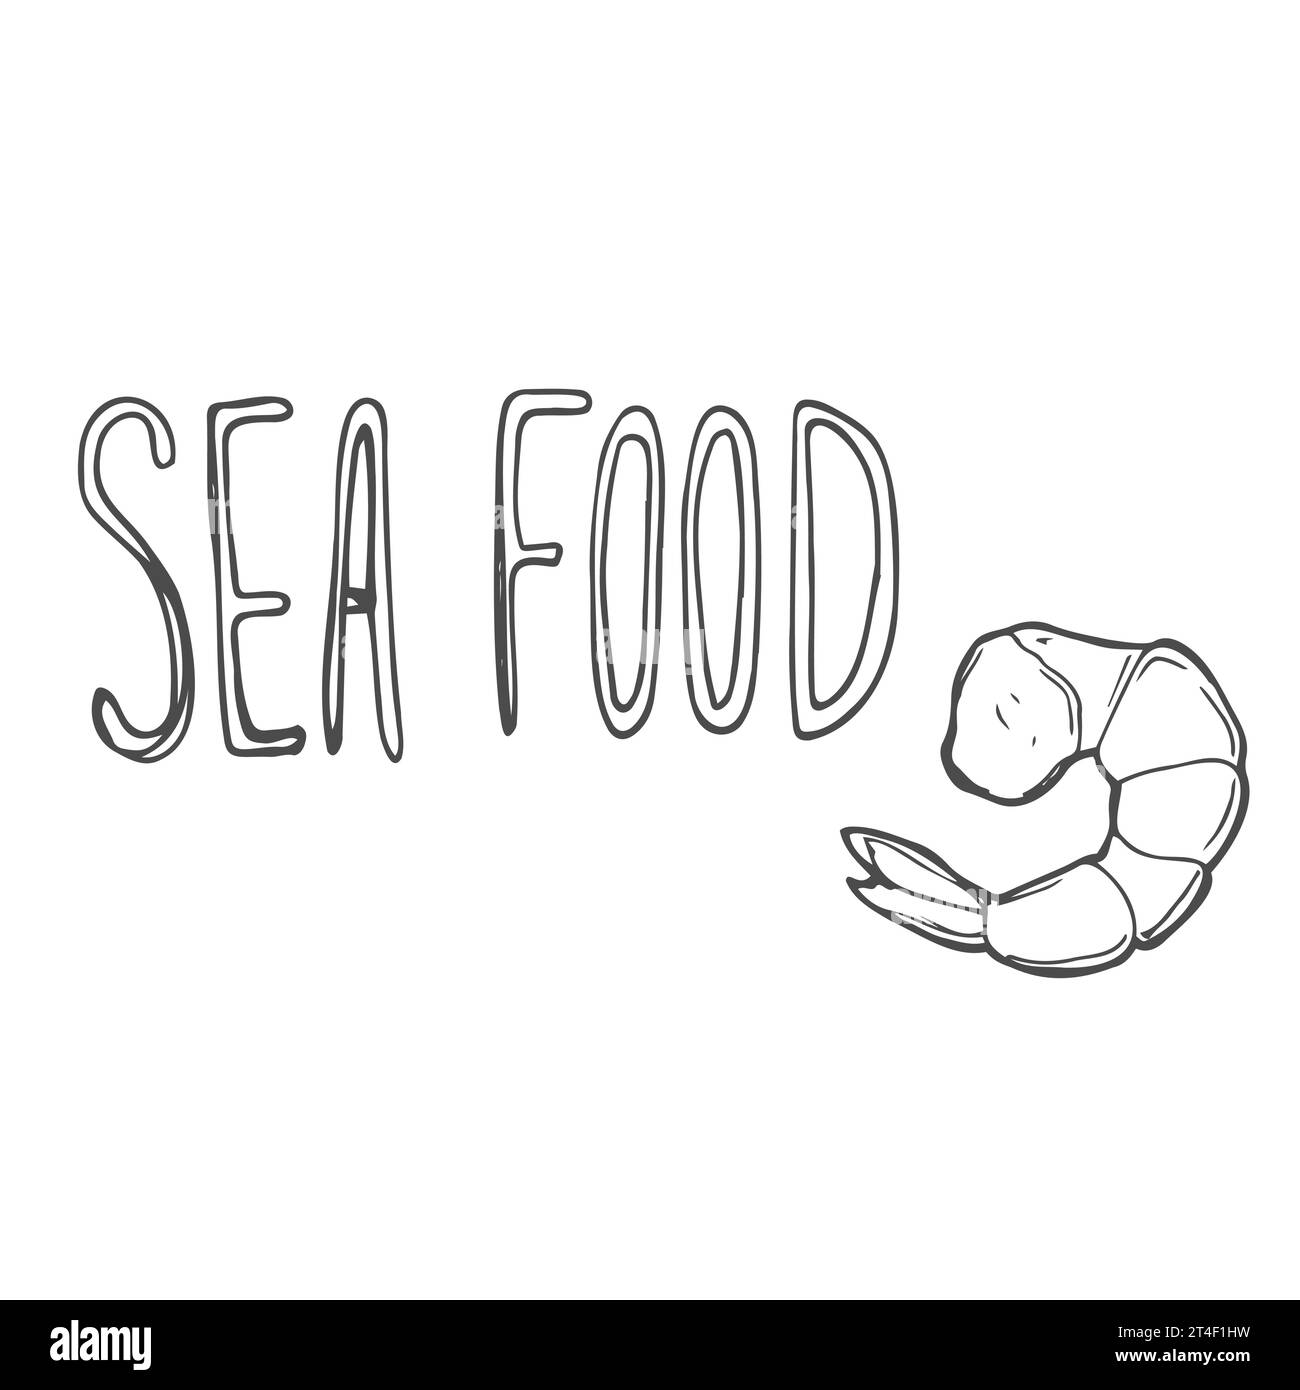 Seafood lettering logo with fish and wave on background. vector Stock Vector